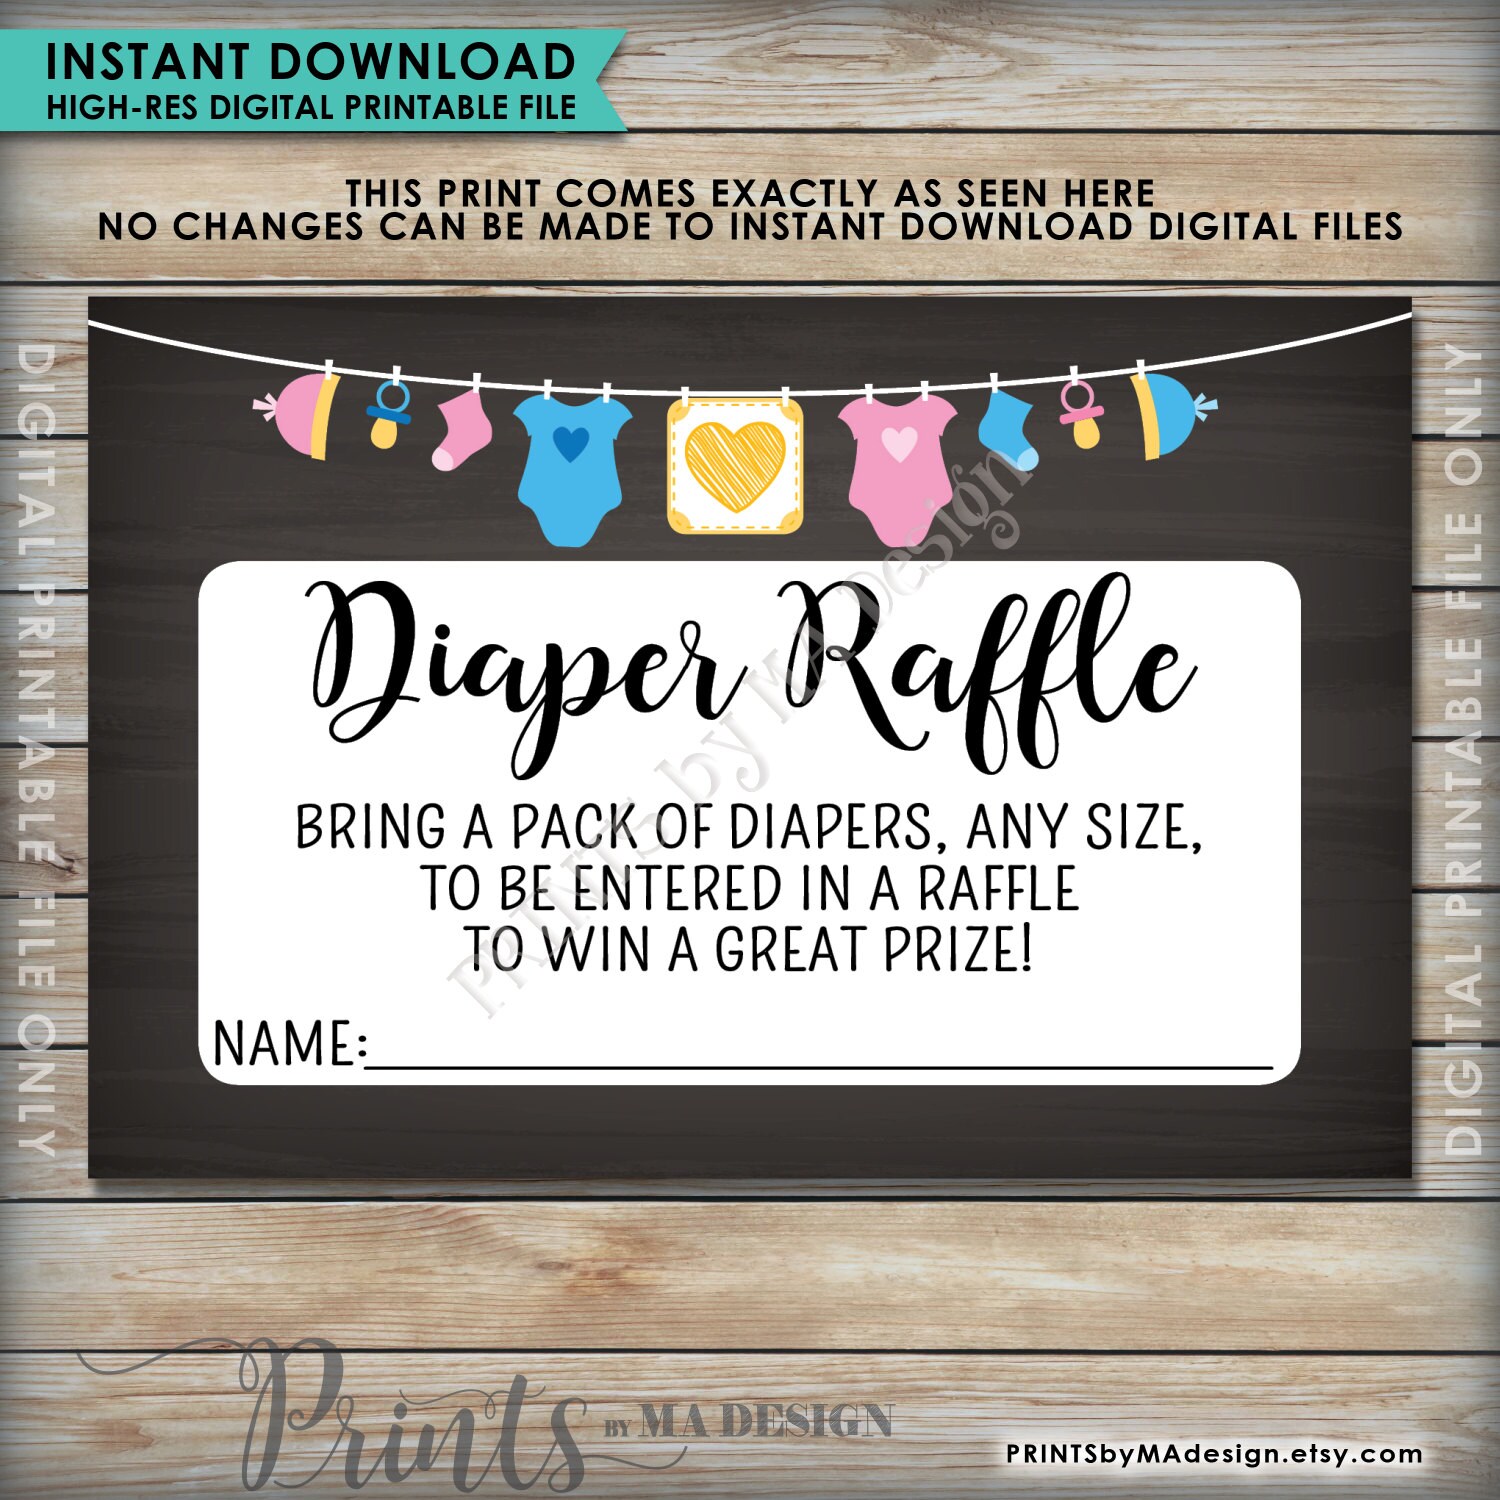 Diaper Raffle Ticket Bring Diapers To Win A Prize Baby Shower Raffle 4x6 Instant Download 